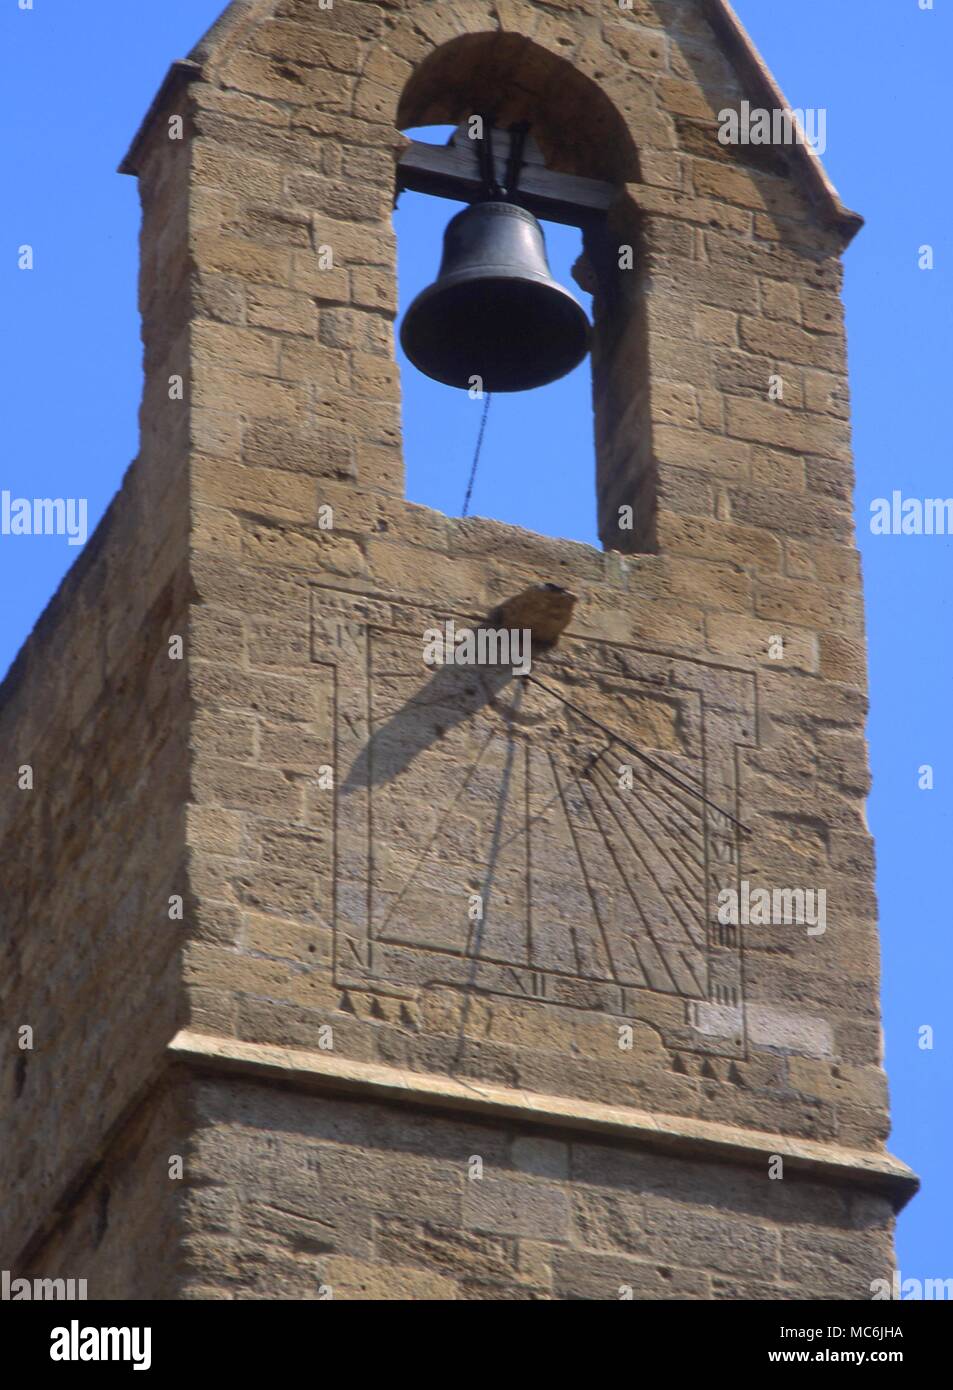 NOSTRADAMUS - SALON. The bell-tower of the church of St Michael in the square behind the house in which Nostradamus lived in the sixteenth century Stock Photo